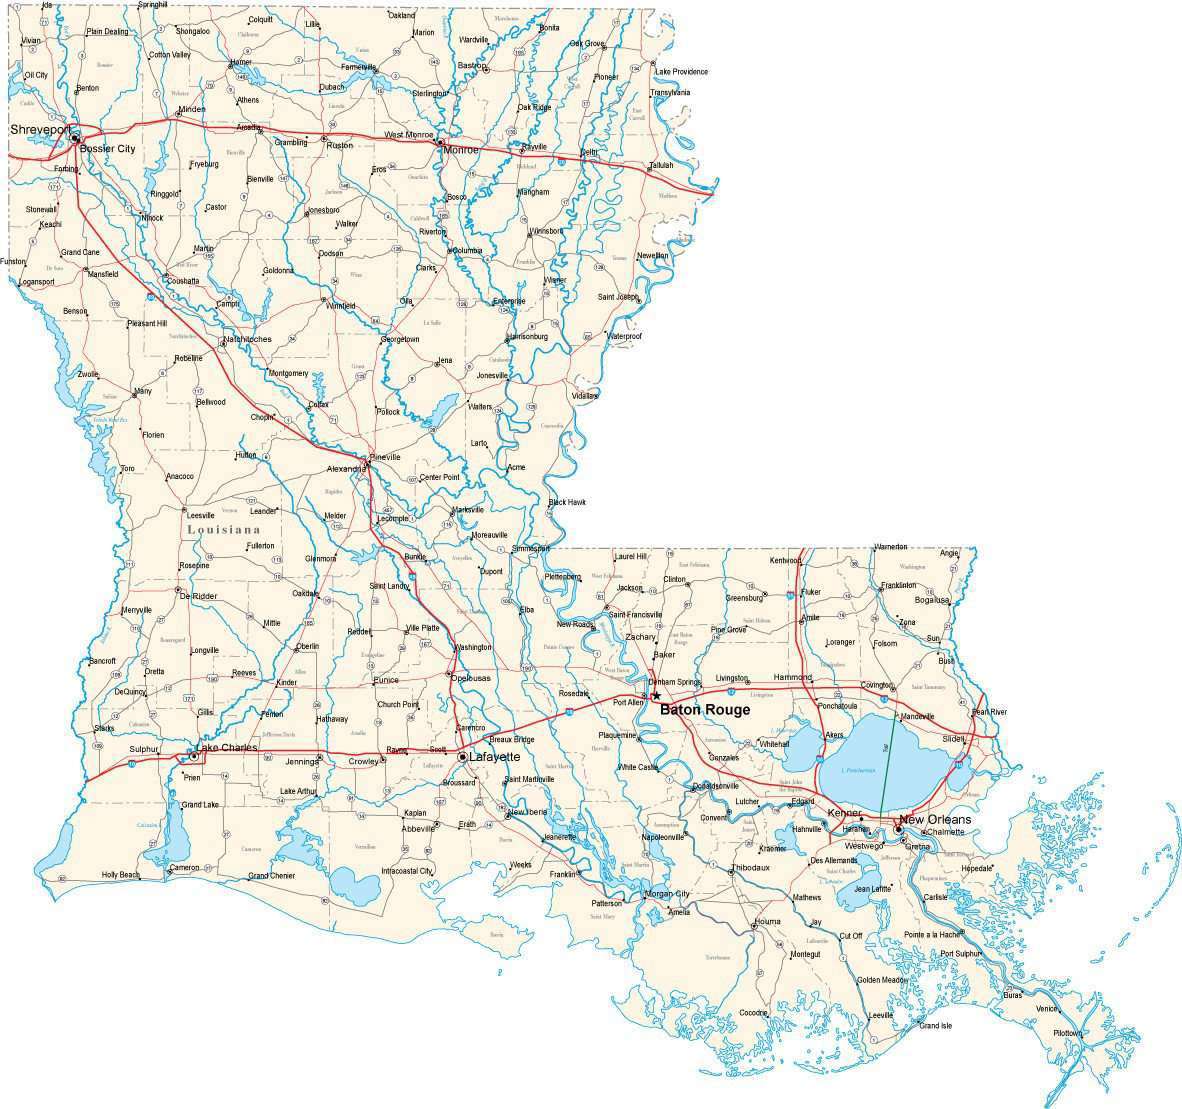 Louisiana State Map - Multi-Color Cut-Out Style - with Counties, Cities,  County Seats, Major Roads, Rivers and Lakes